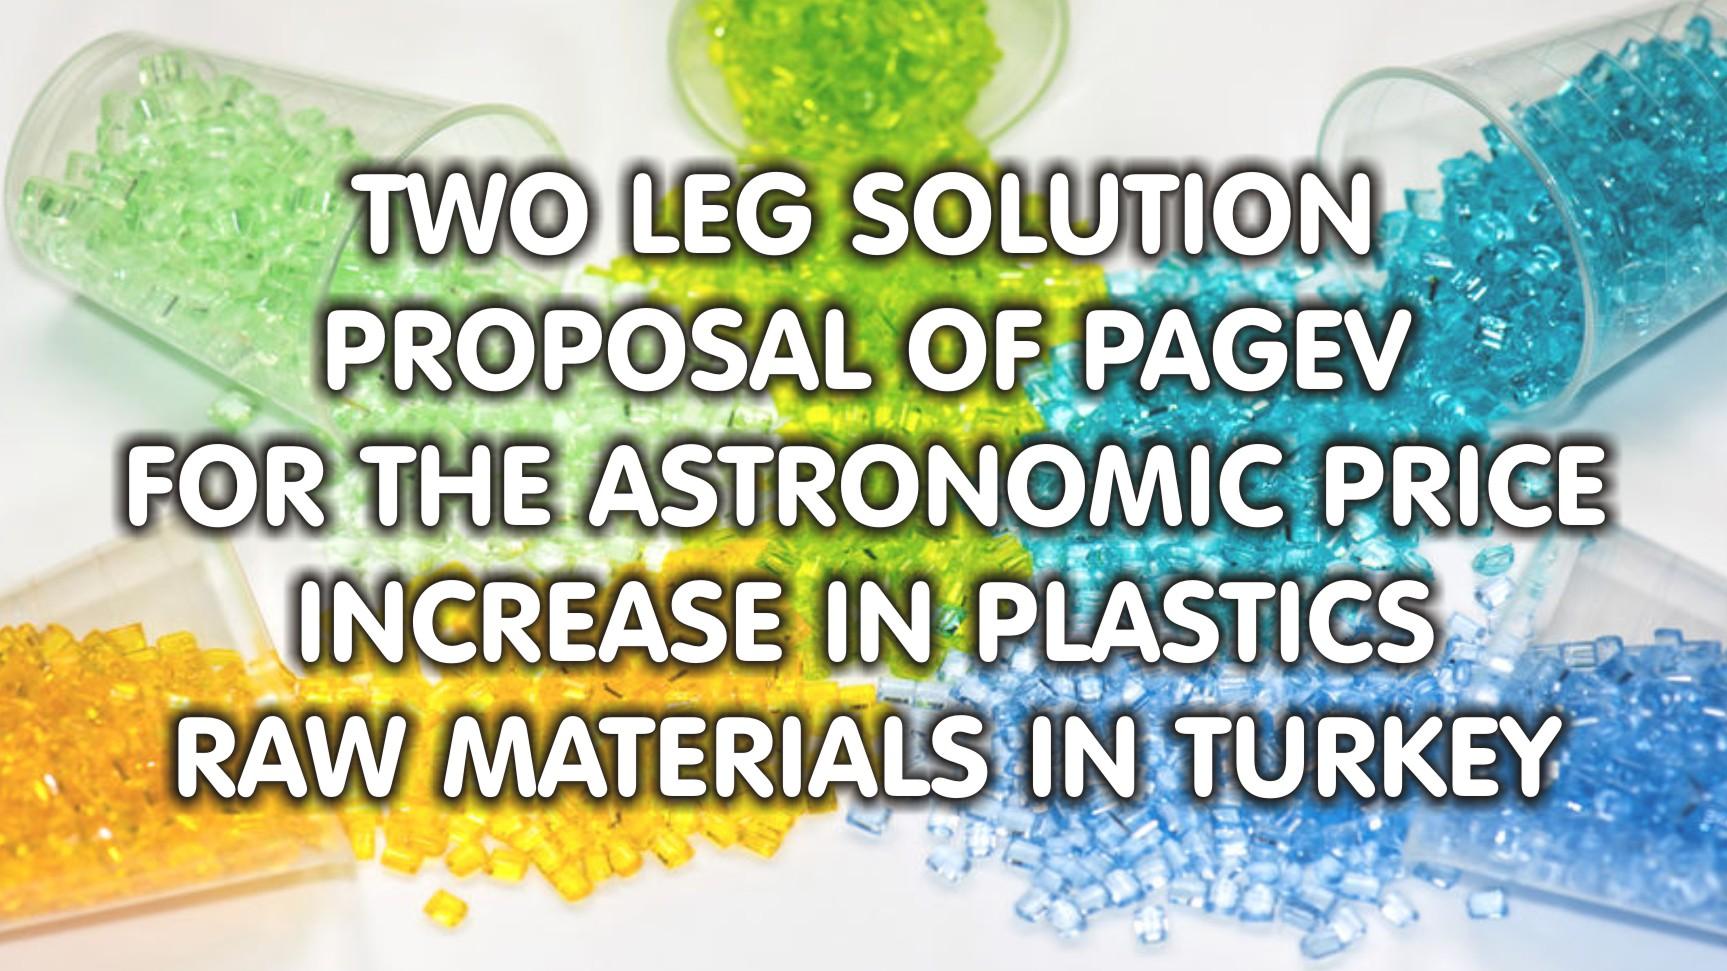 TWO LEG SOLUTION PROPOSAL OF PAGEV FOR THE ASTRONOMIC PRICE INCREASE IN PLASTICS RAW MATERIALS IN TURKEY